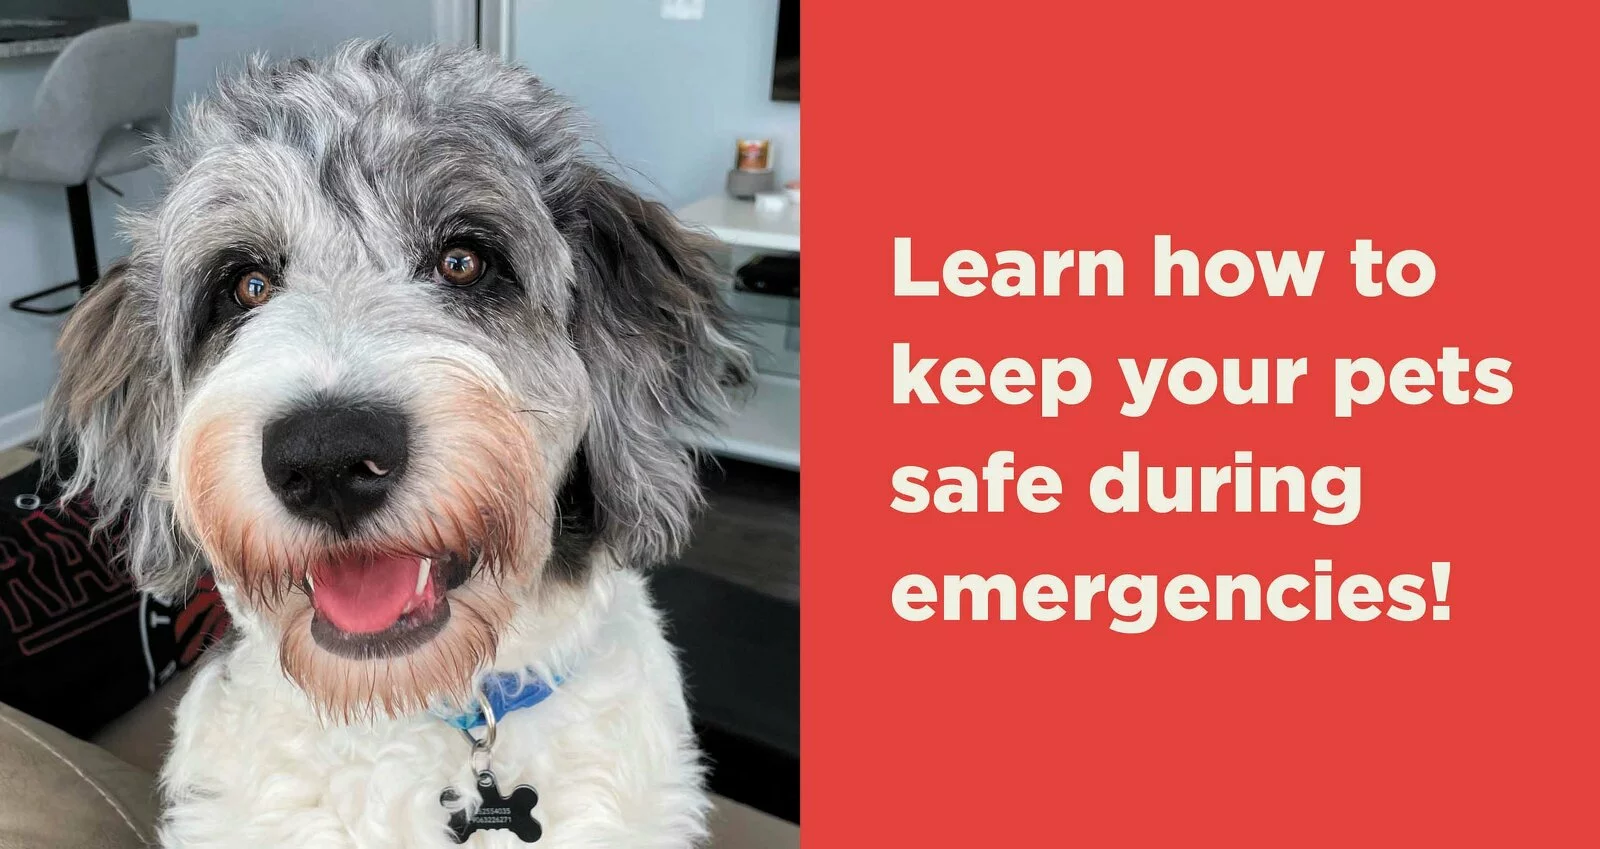 Learn how to keep your pets safe during emergencies